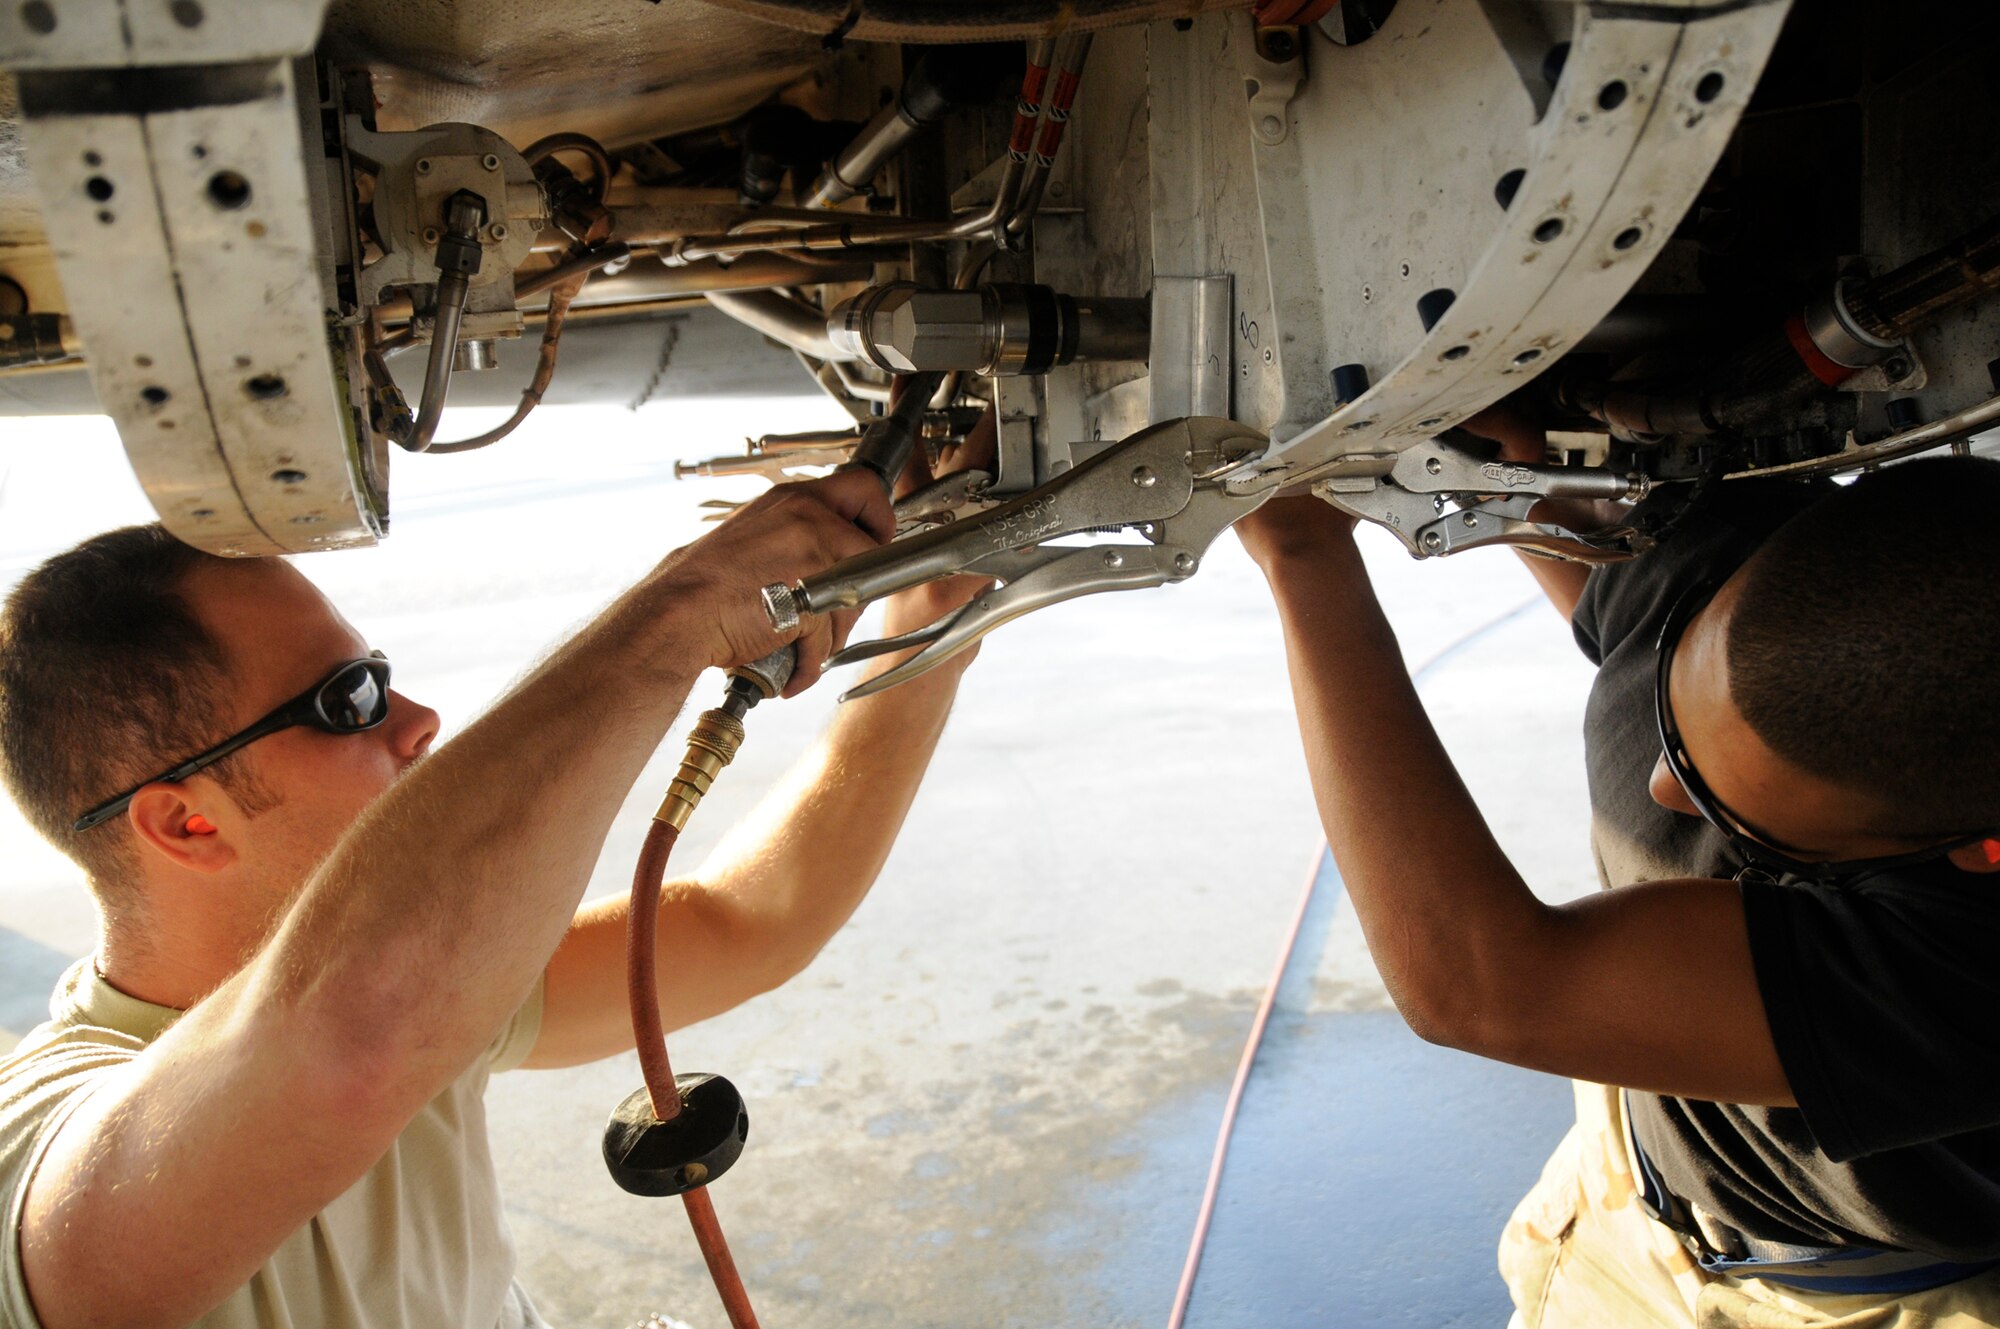 Tech. Sgt. Brian Hardwick and Airman 1st Class Jean-Michael Sibilly, both structural aircraft maintainer assigned to the 379th Expeditionary Maintenance Squadron, repair a B-1 engine nacelle that was damaged from a tire blow out at an undisclosed air base in Southwest Asia, Nov. 18, 2008. Sergeant Hardwick, a native of Santa Cruz, Calif., is deployed from Royal Air Force Mildenhall, U.K., and Airman Sibilly, a native of Charlotte Amalie, St. Thomas United States Virgin Island, is deployed from Ellsworth Air Force Base, S.D., both in support of Operations Iraqi and Enduring Freedom and Joint Task Force-Horn of Africa. (U.S. Air Force photo by Staff Sgt. Darnell T. Cannady/Released)